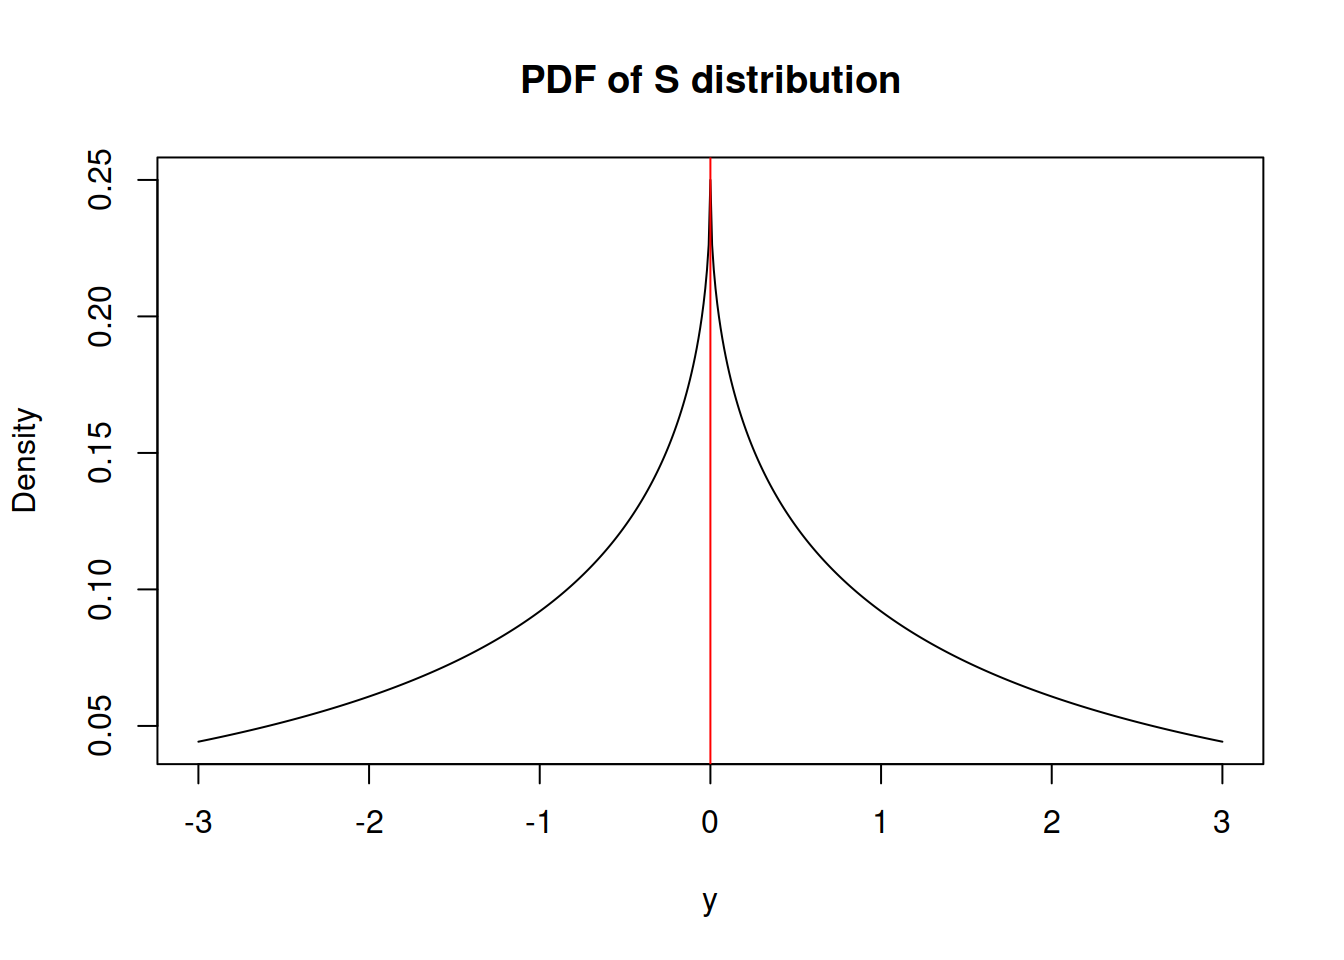 Probability Density Function of S distribution